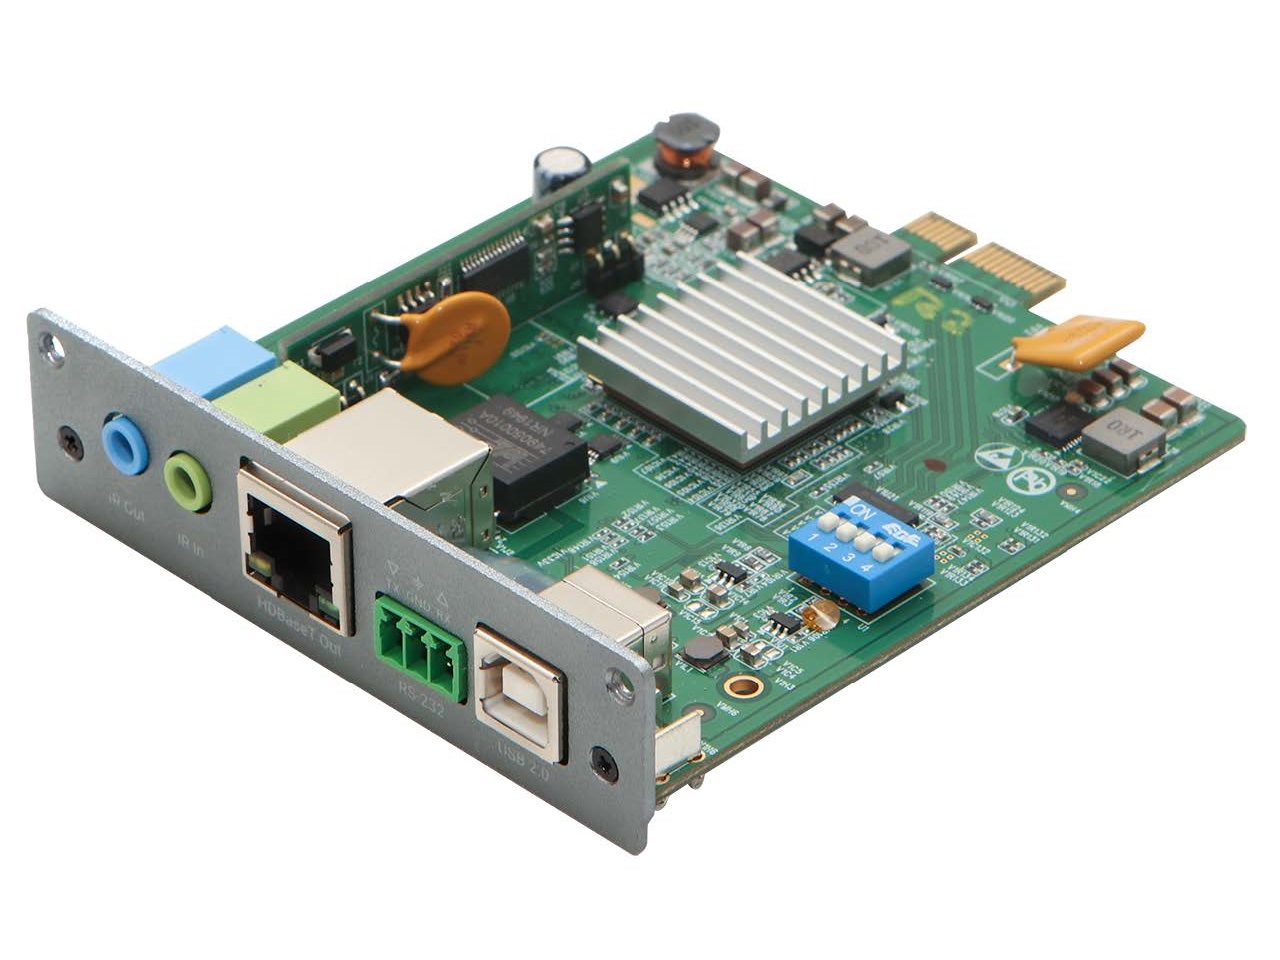 EXP-HDBT3-TRX100 HDBaseT Expansion Card for EMCEE200 Presentation Switcher by Hall Research